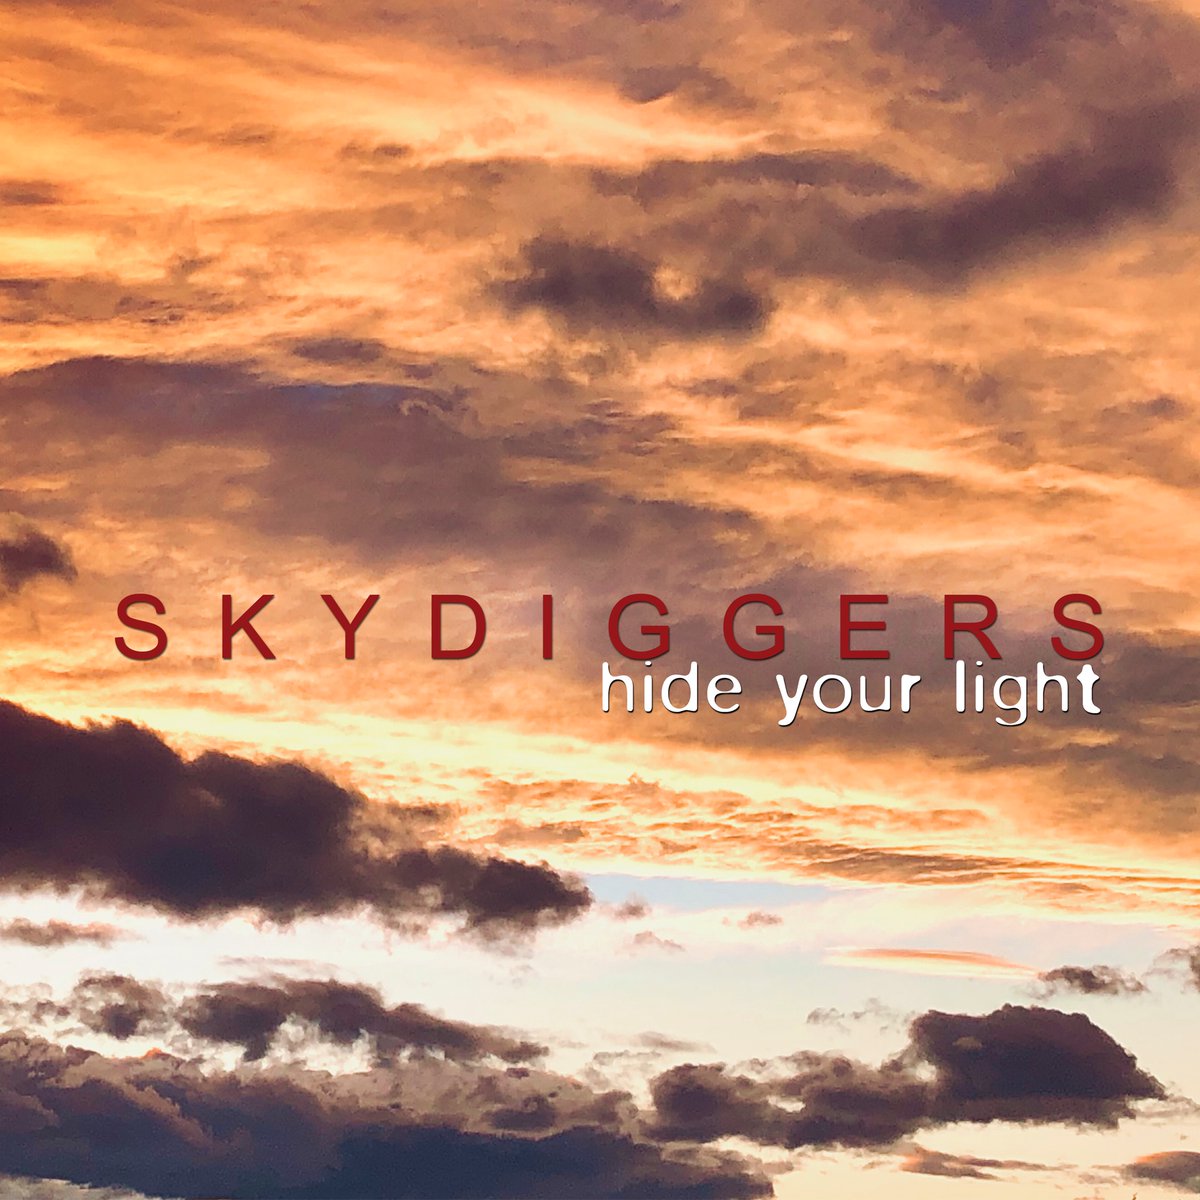 It's Bandcamp Friday - check out Skydigger's new EP Hide Your Light! ow.ly/7uXa50PGUyF